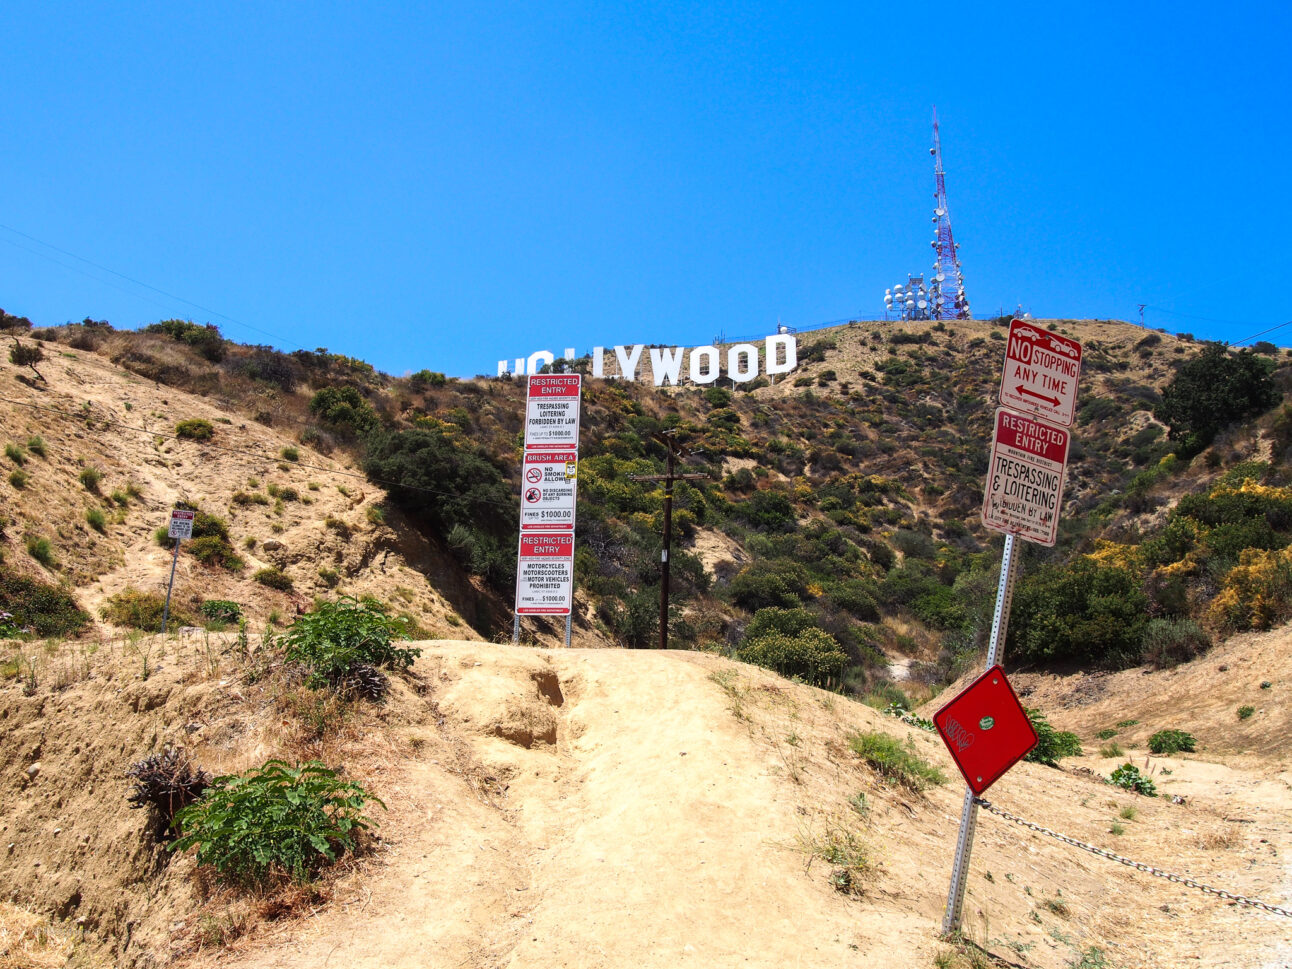 HollywoodSign 3 1292x969 